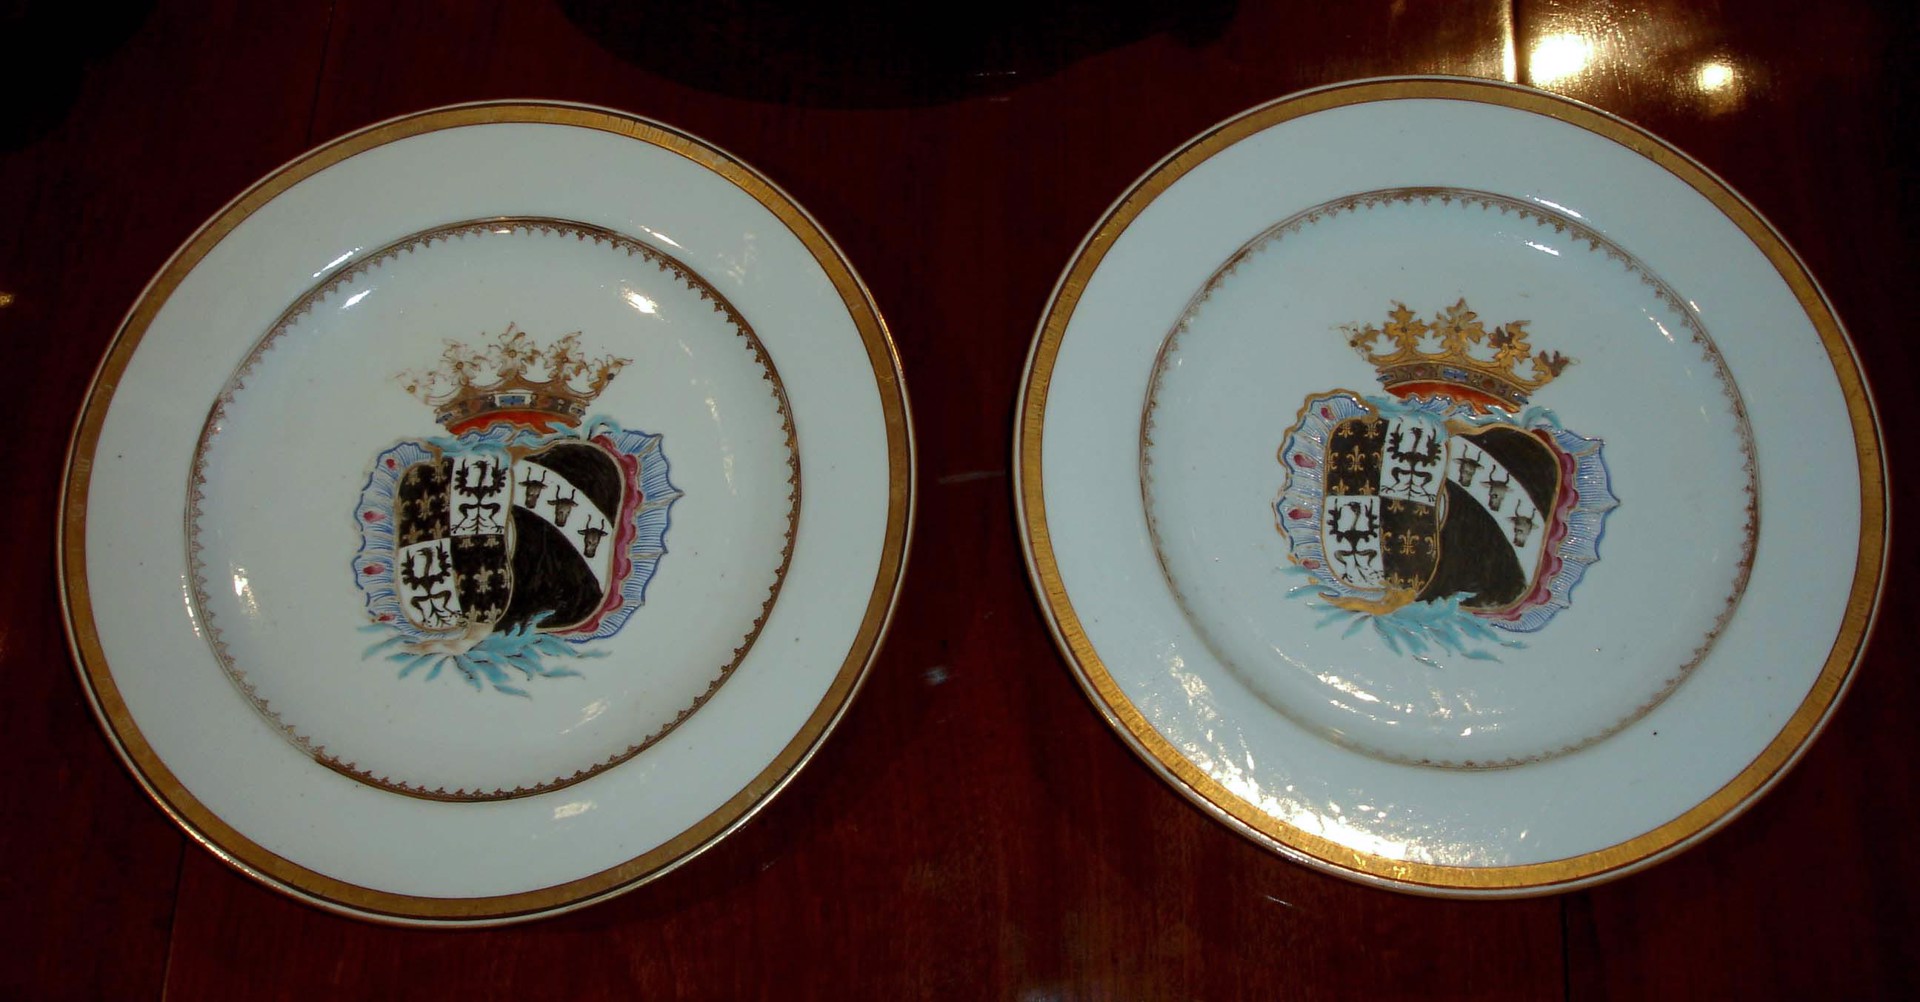 FOUR ARMORIAL DISHES WITH ARMS OF DE FAMARS AND VRIESEN